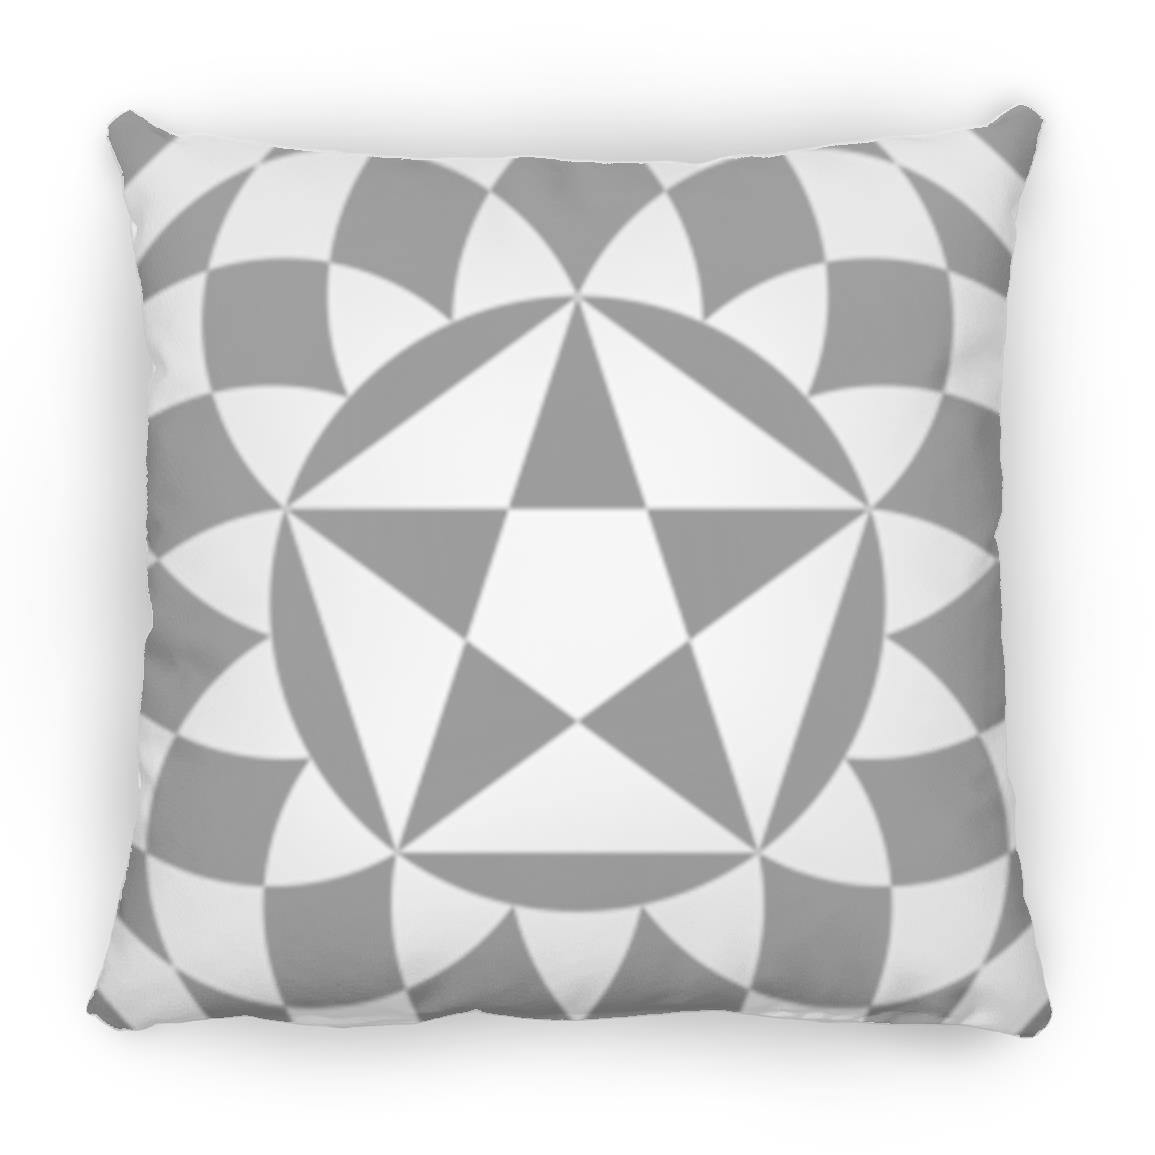 Crop Circle Pillow - Cheesefoot Head - Shapes of Wisdom